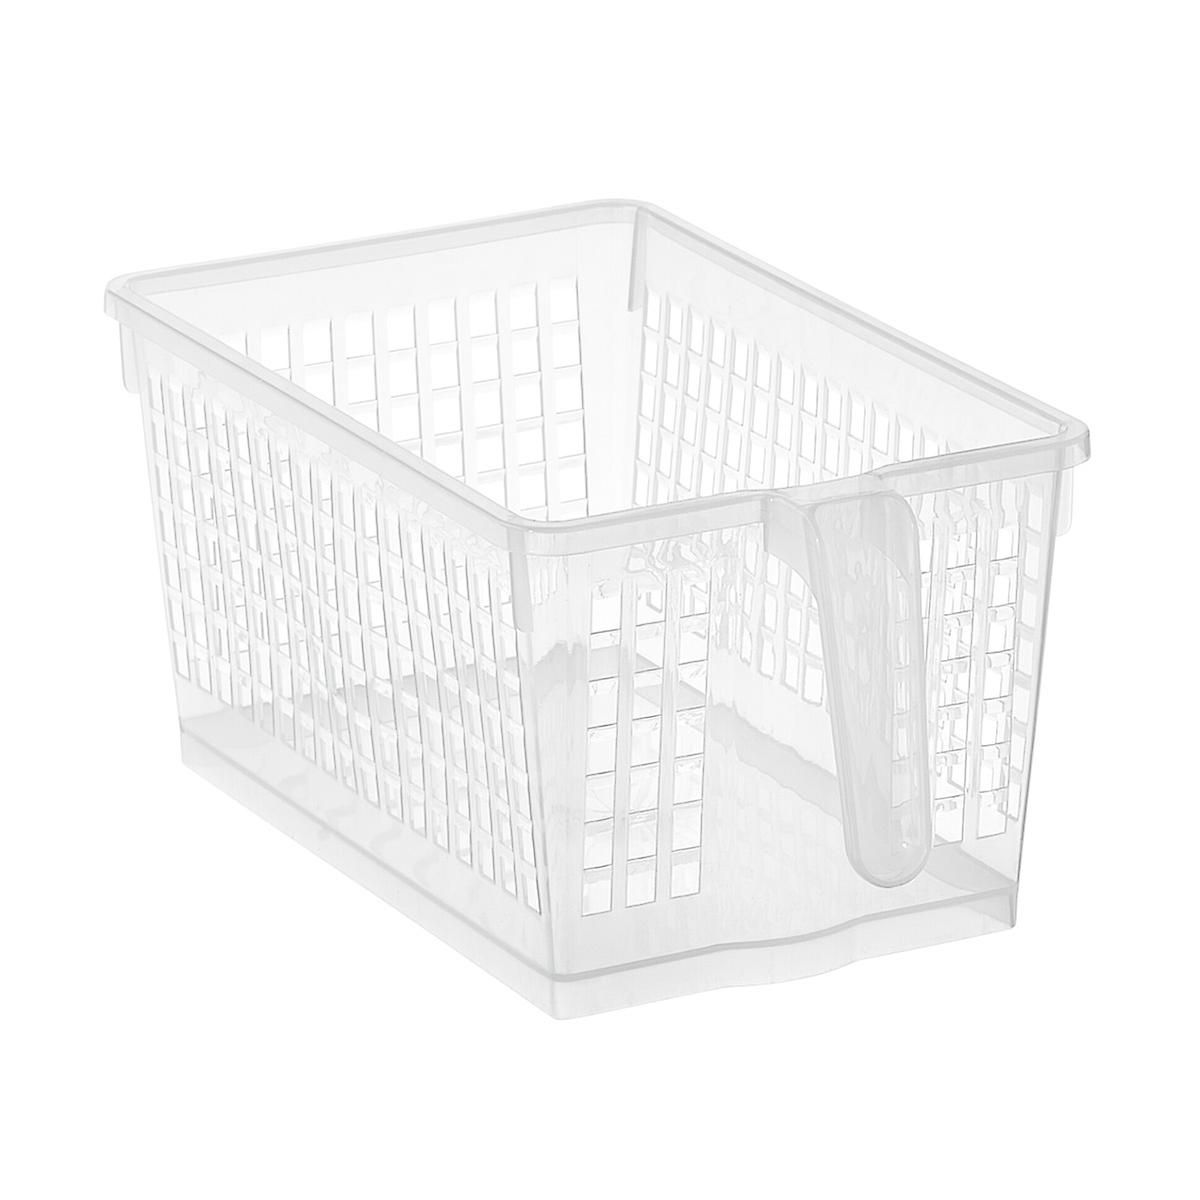 Handled Pantry Organizer Storage Baskets | The Container Store